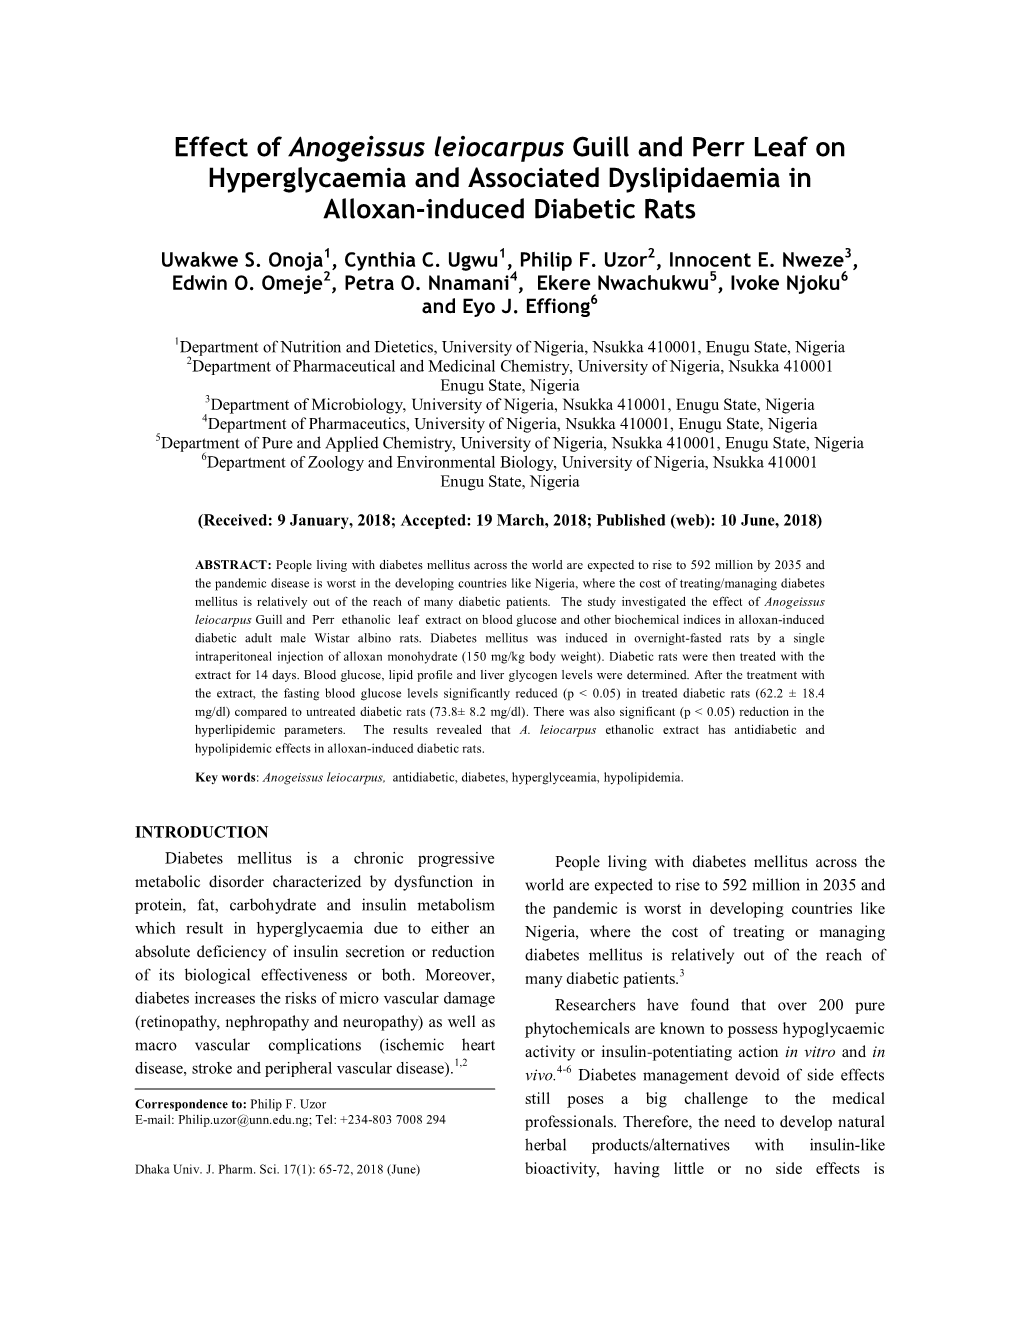 Effect of Anogeissus Leiocarpus Guill and Perr Leaf on Hyperglycaemia and Associated Dyslipidaemia in Alloxan-Induced Diabetic Rats